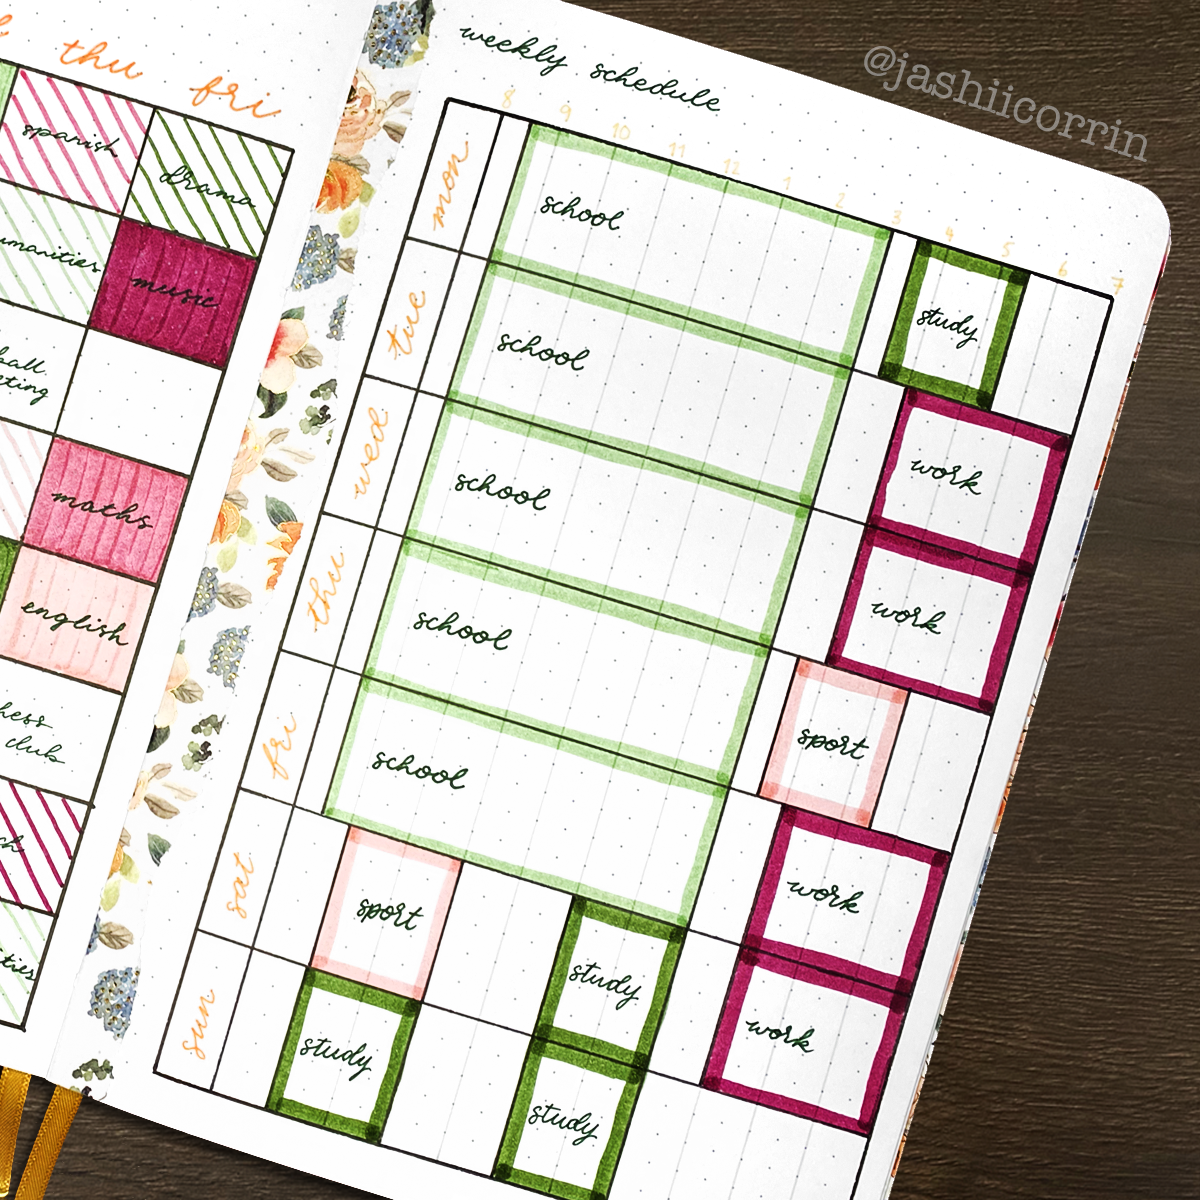 Study Planner - Planner and Bullet Journal Printable